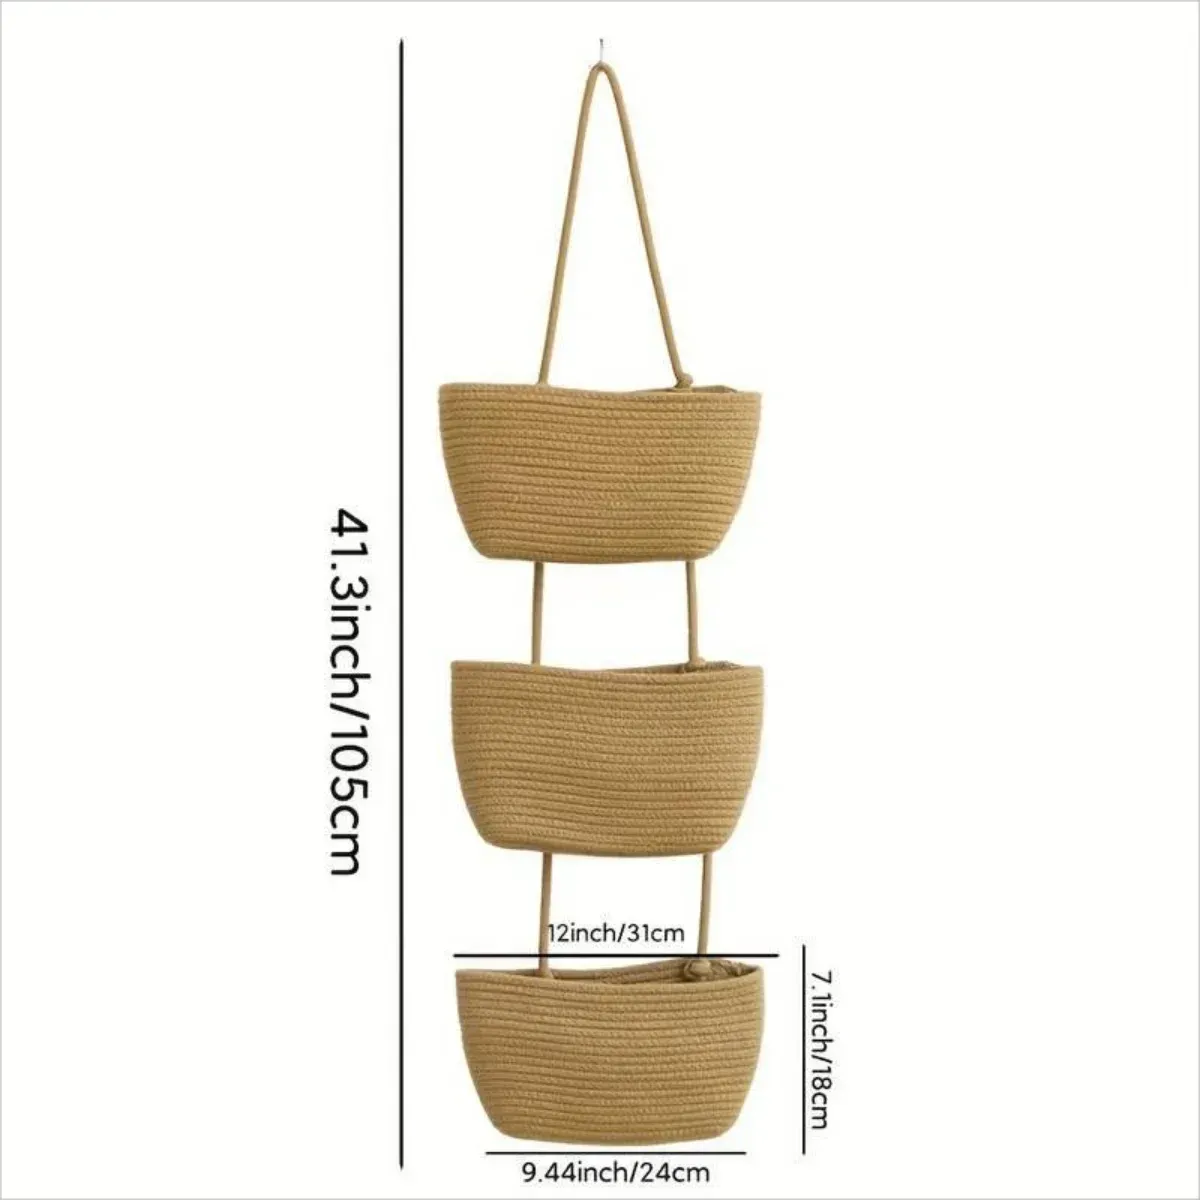 Baskets Wall Hanging Cotton Rope Woven Storage Basket Organizer 3 Tier Multipurpose for Home Bedroom Dormitory Toys Book Organization